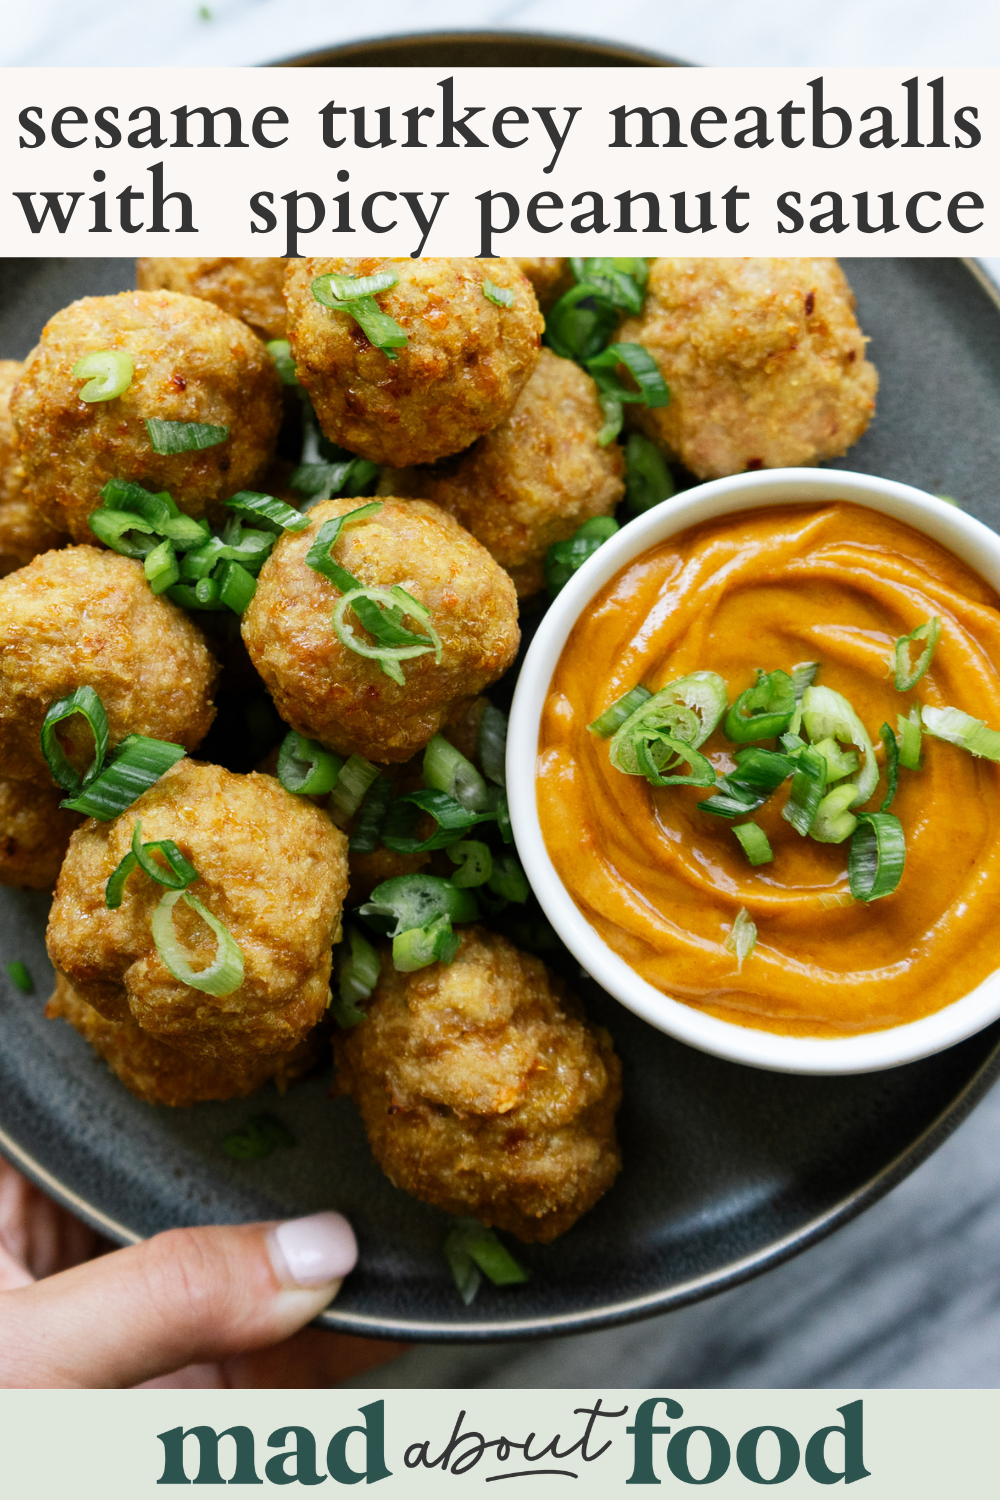 Image for Pinning Sesame Turkey Meatballs  with Spicy Peanut Sauce recipe on Pinterest